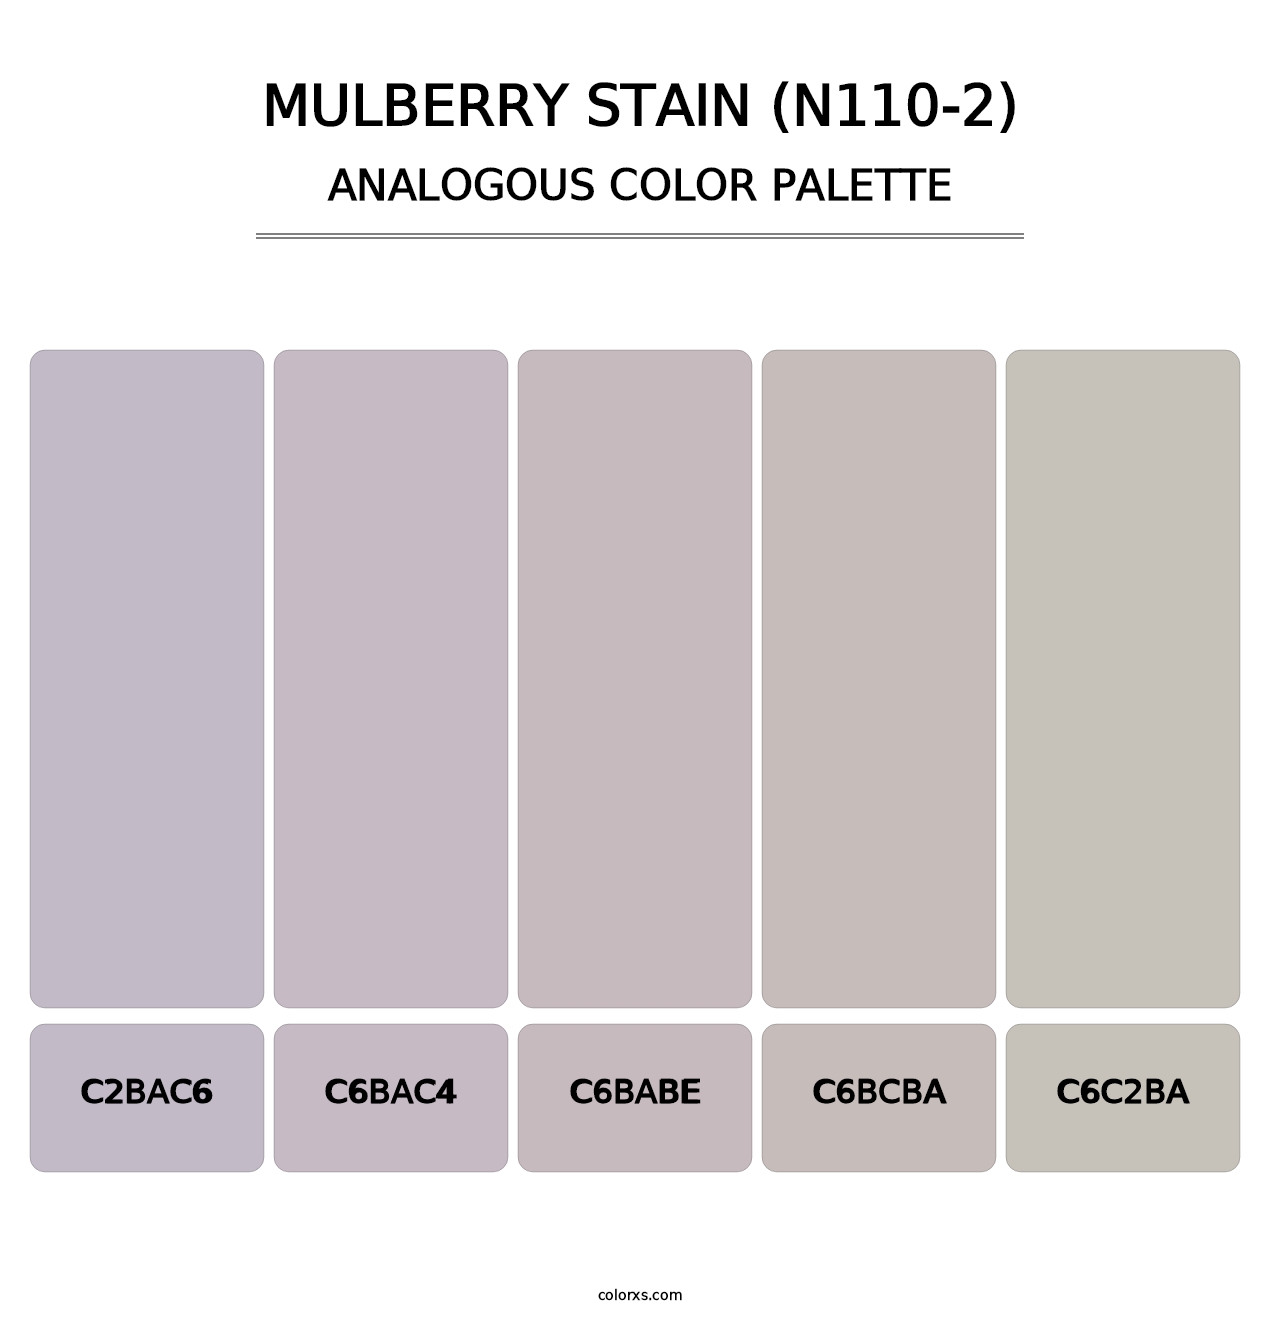 Mulberry Stain (N110-2) - Analogous Color Palette